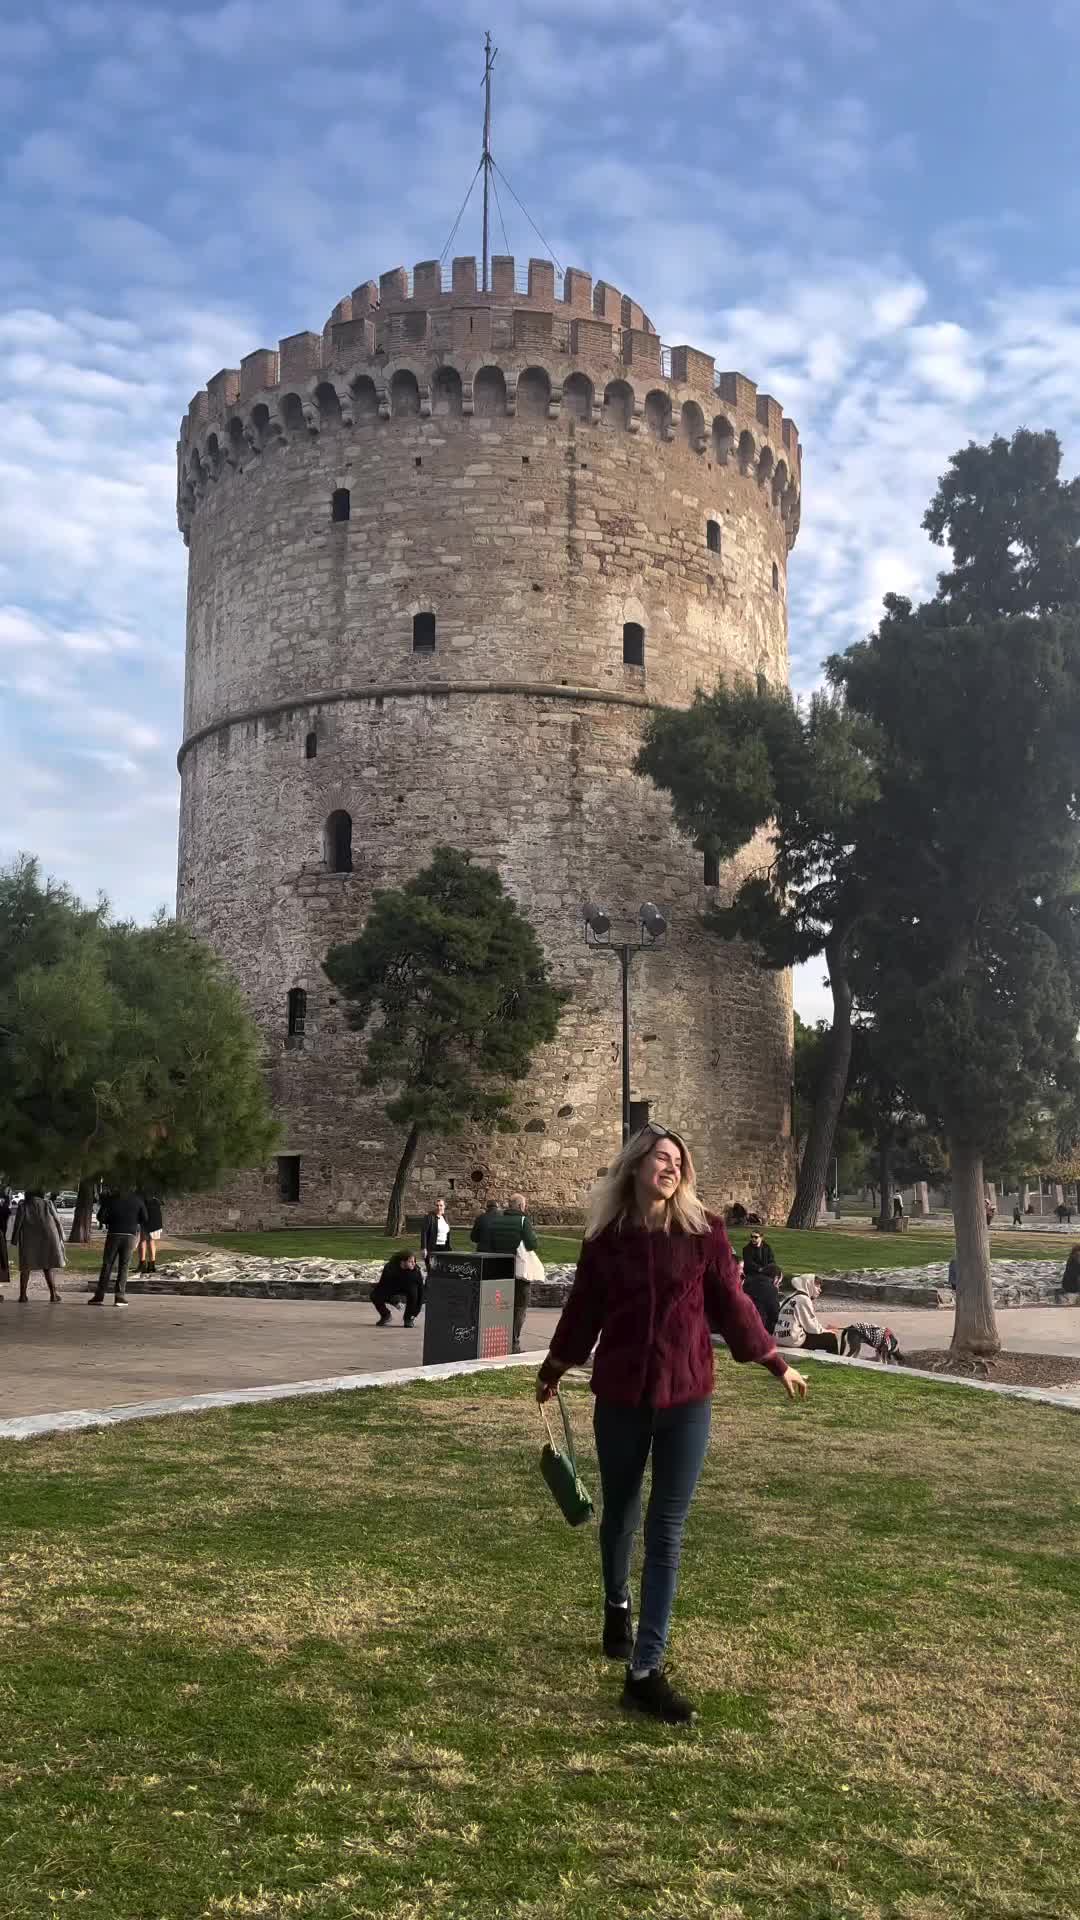 Happy New Year from Thessaloniki’s White Tower! 🎊🥂✨